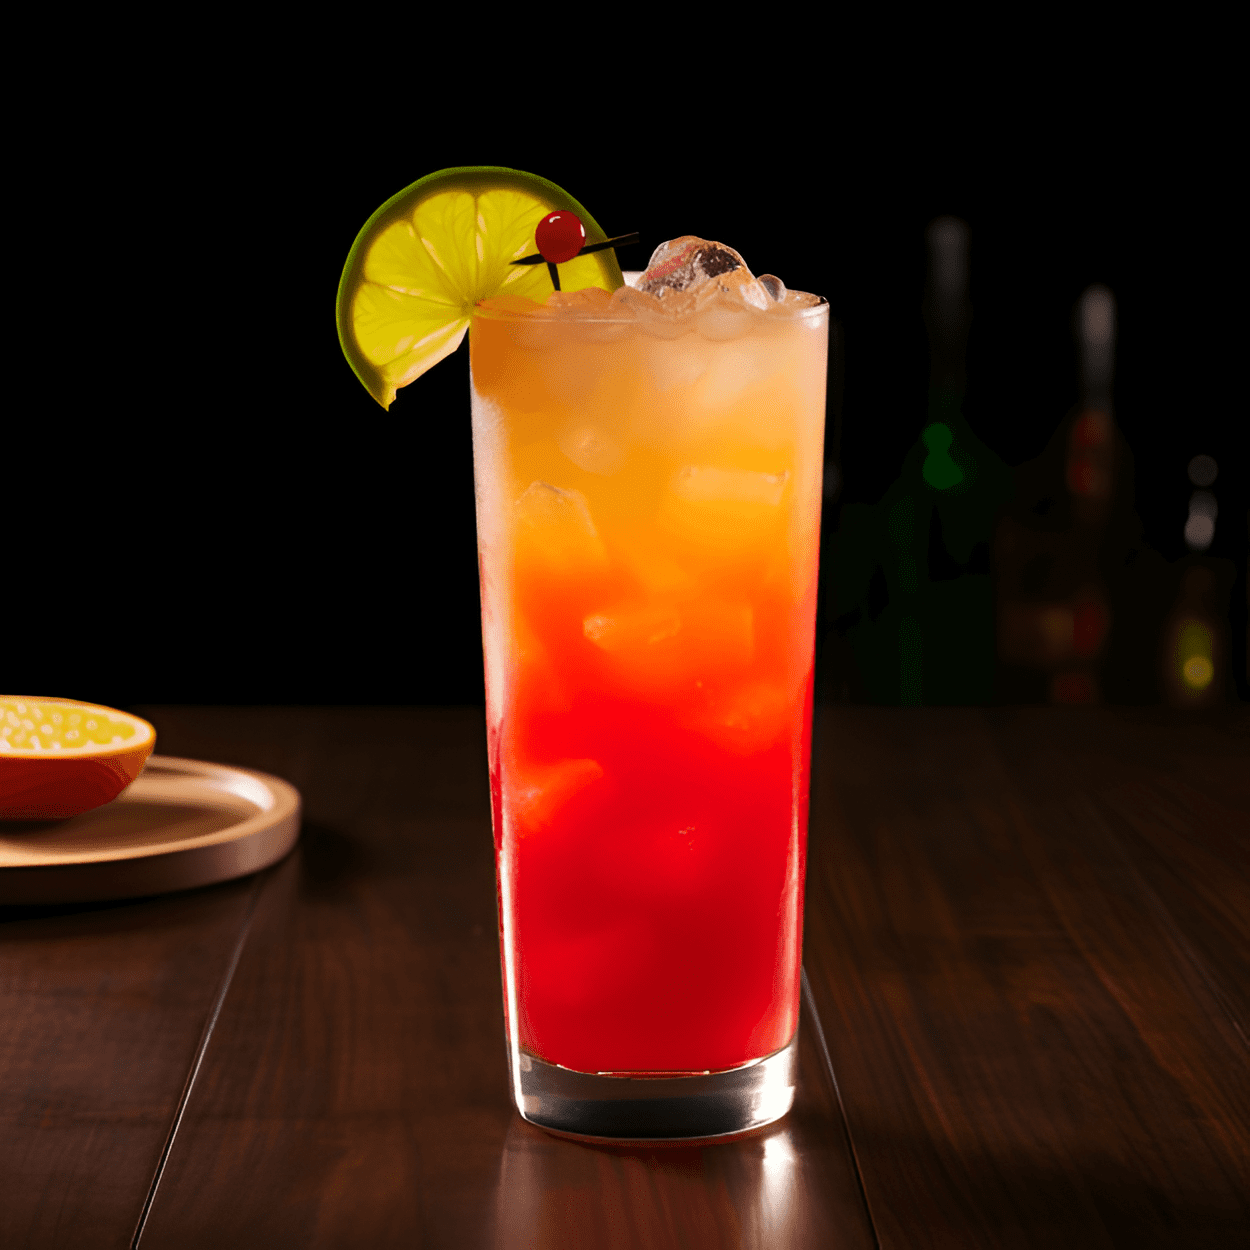 Mexican Sunset Cocktail Recipe - The Mexican Sunset is a sweet, fruity cocktail with a hint of sourness from the lime. It's a refreshing, light drink with a strong taste of tequila.